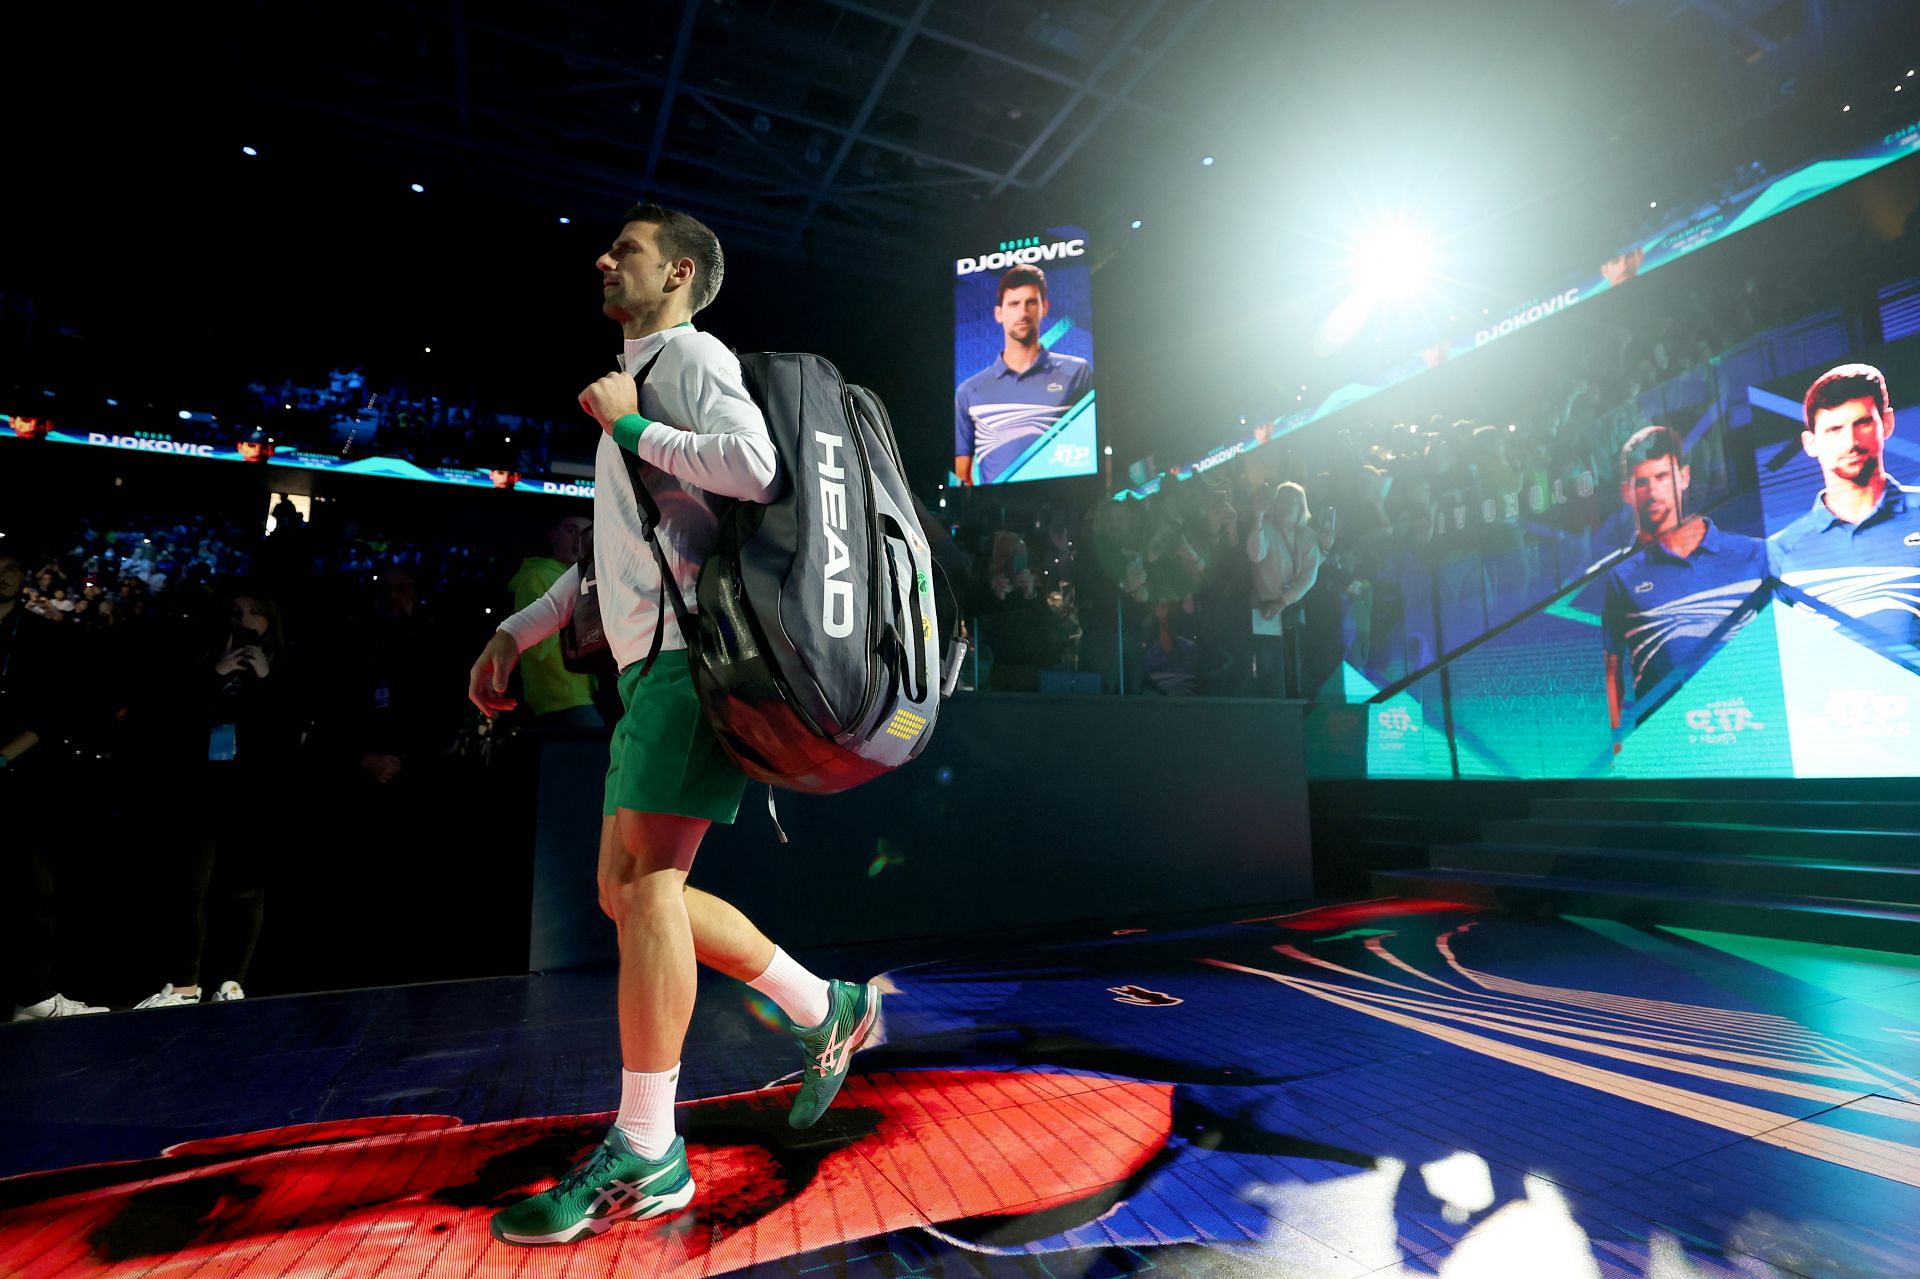 Novak Djokovic walks onto the court for his match against Taylor Fritz at the 2022 ATP Finals